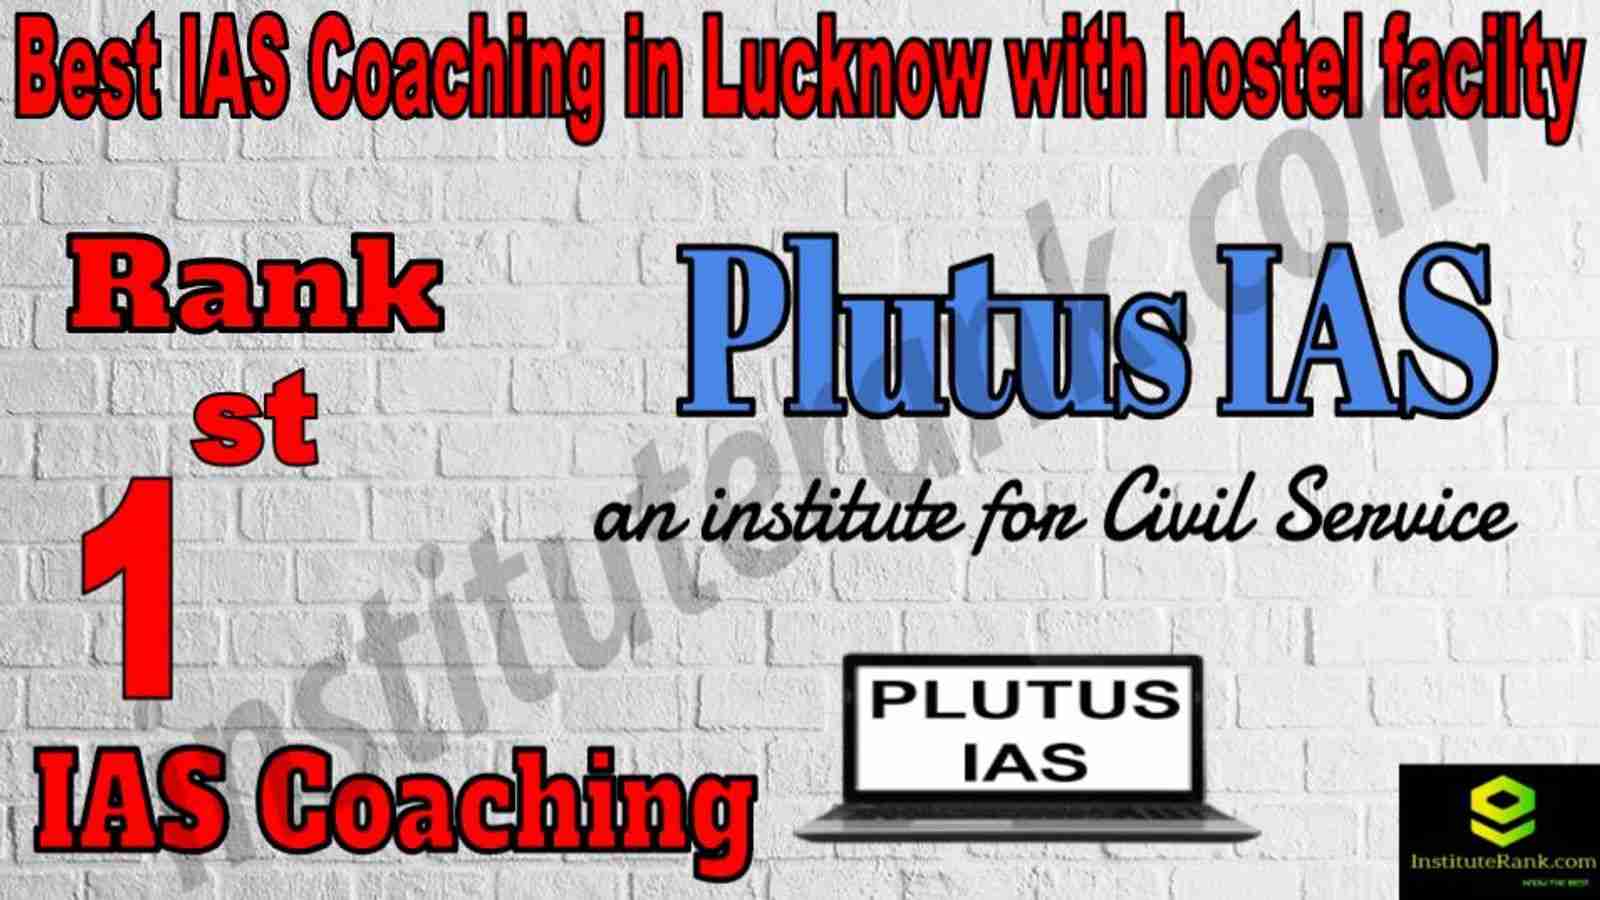 1st Best IAS Coaching in Lucknow With Hostel facility